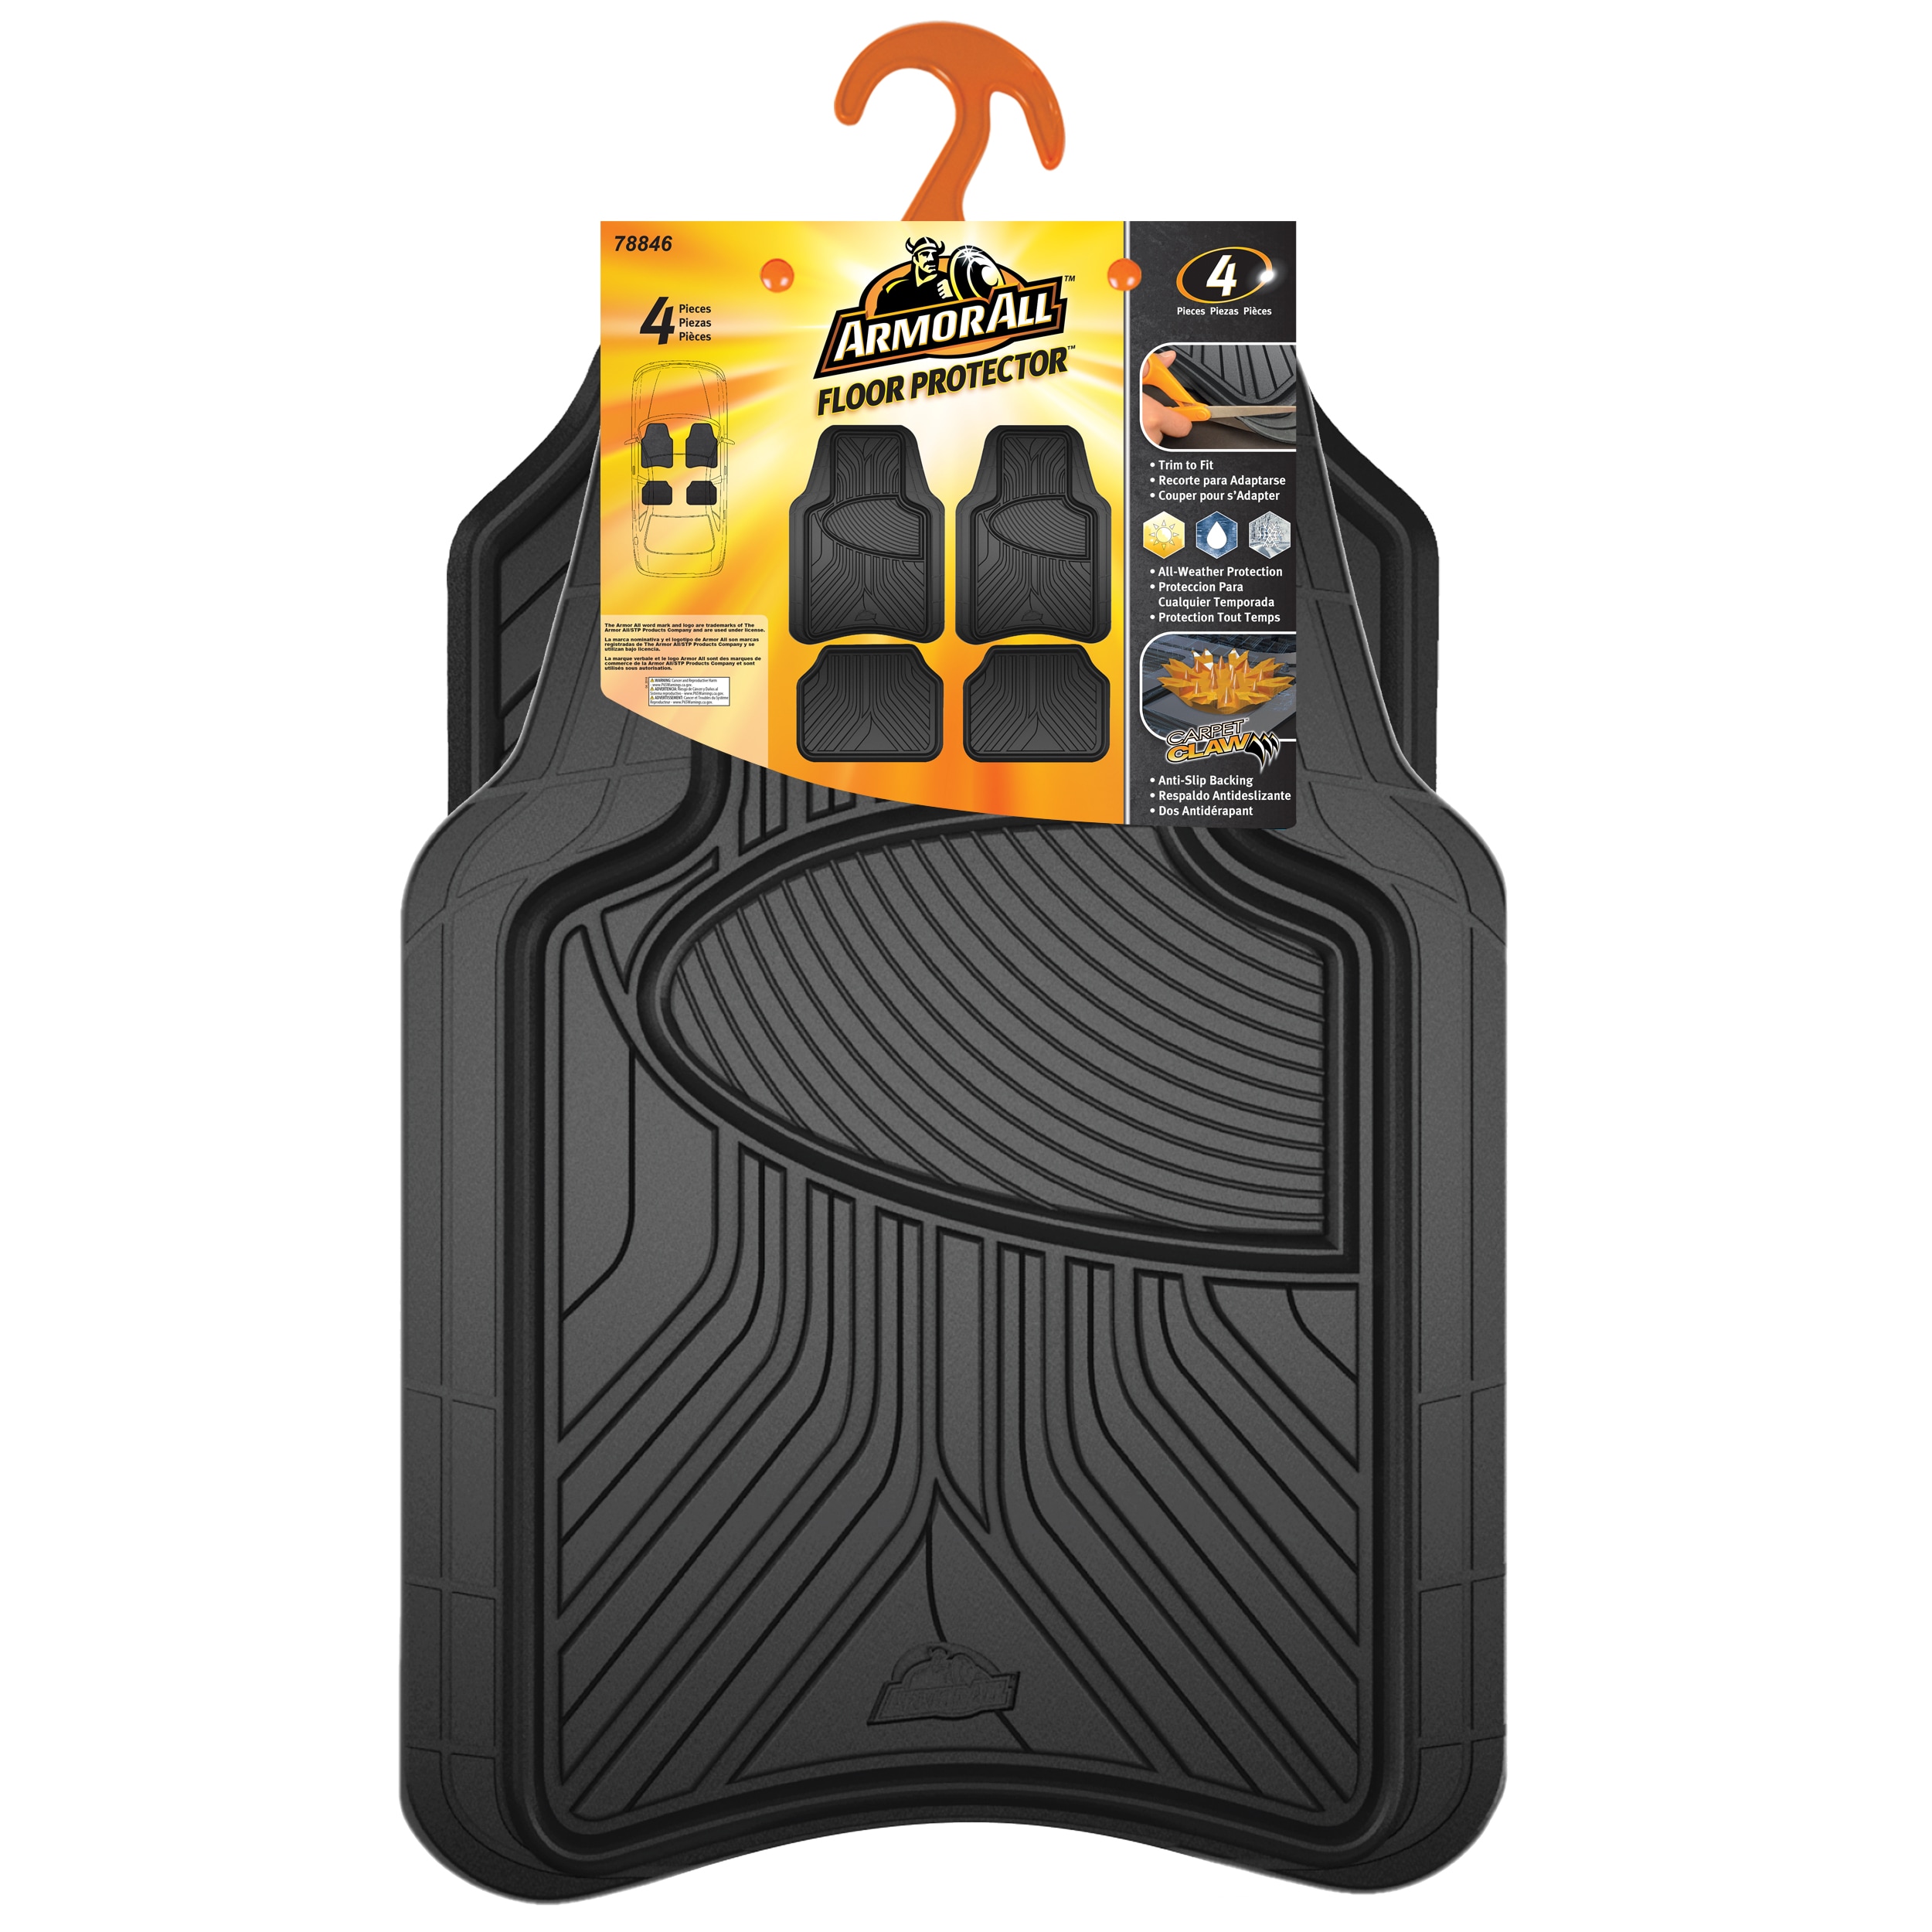 2 Pack, All Weather Floor Mats-Universal 4 Piece Car Interior- Rubber Clear  Car